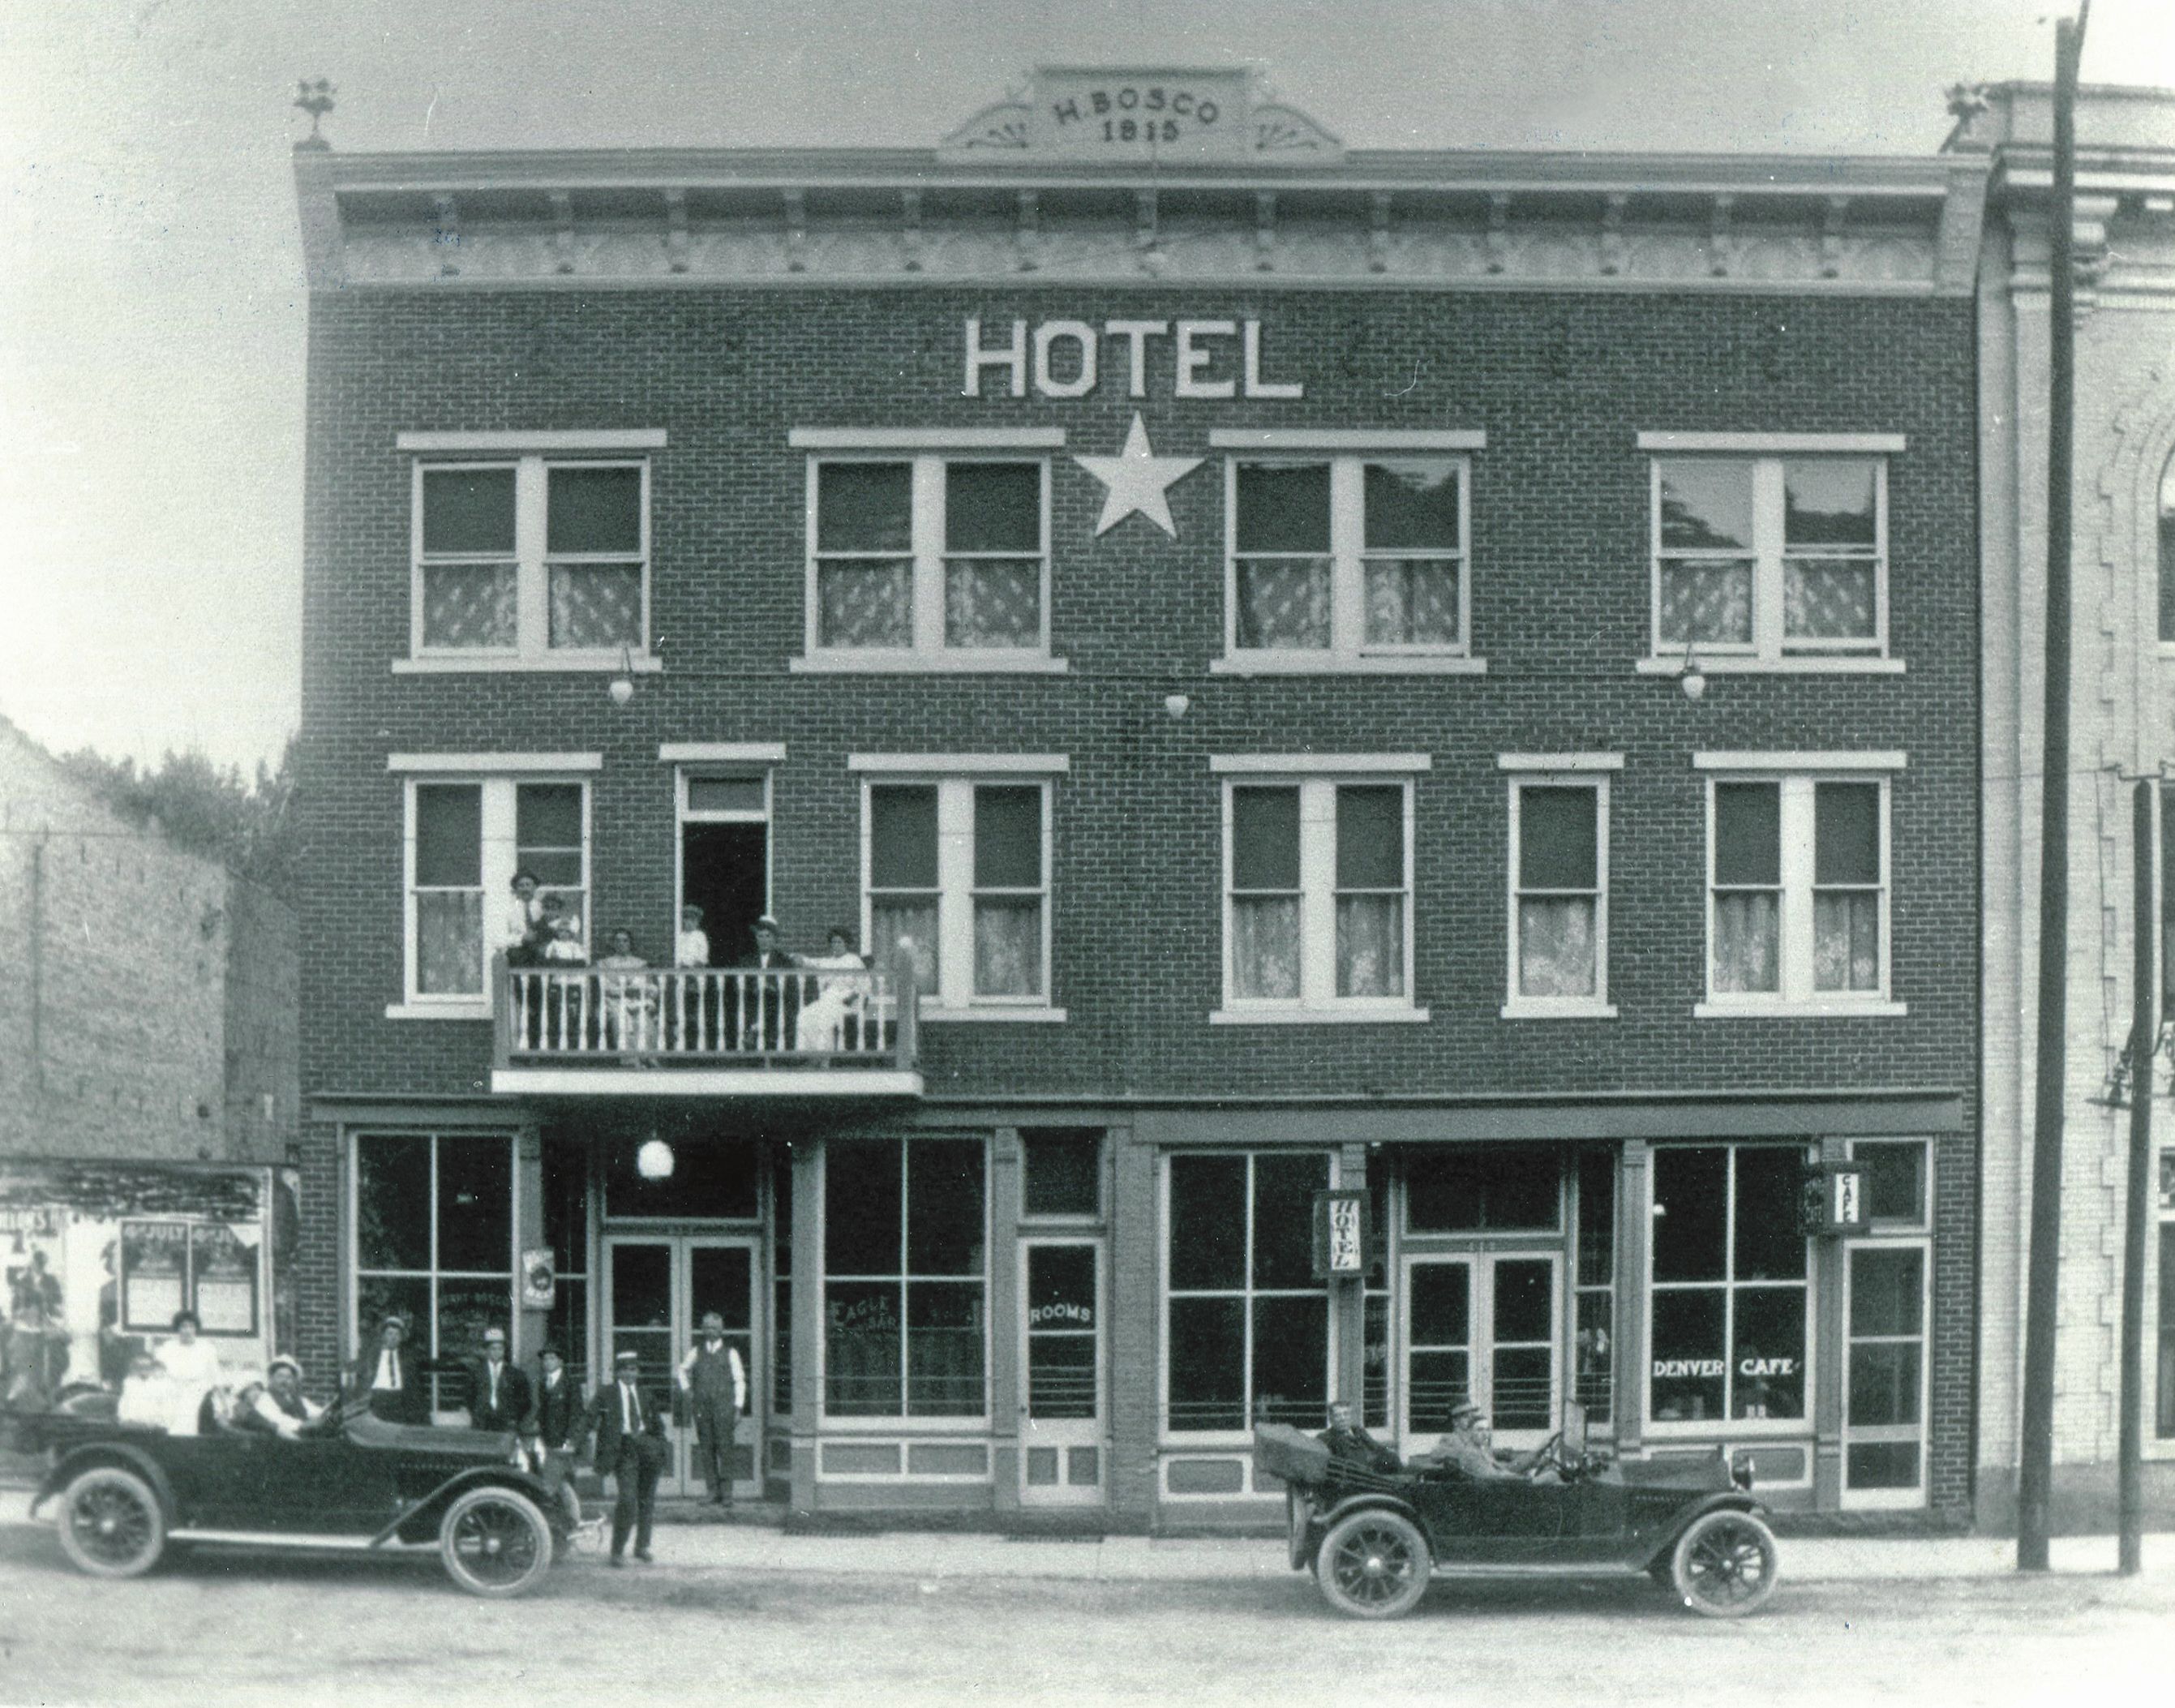 The Star Hotel opened in 1915 and eventually became part of The Hotel Denver.